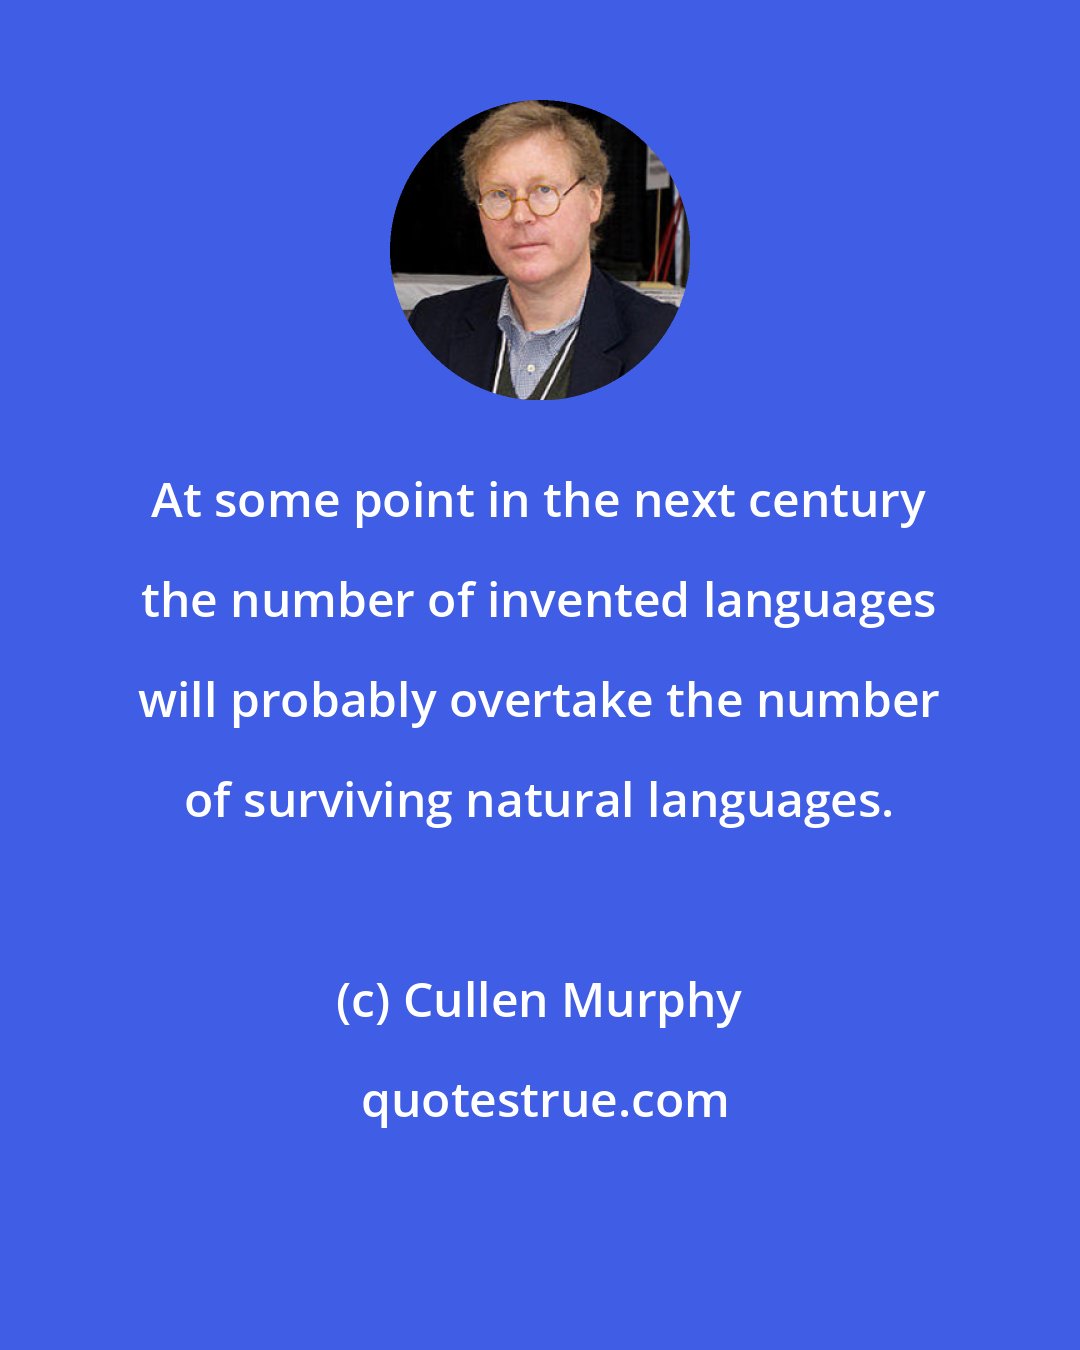 Cullen Murphy: At some point in the next century the number of invented languages will probably overtake the number of surviving natural languages.